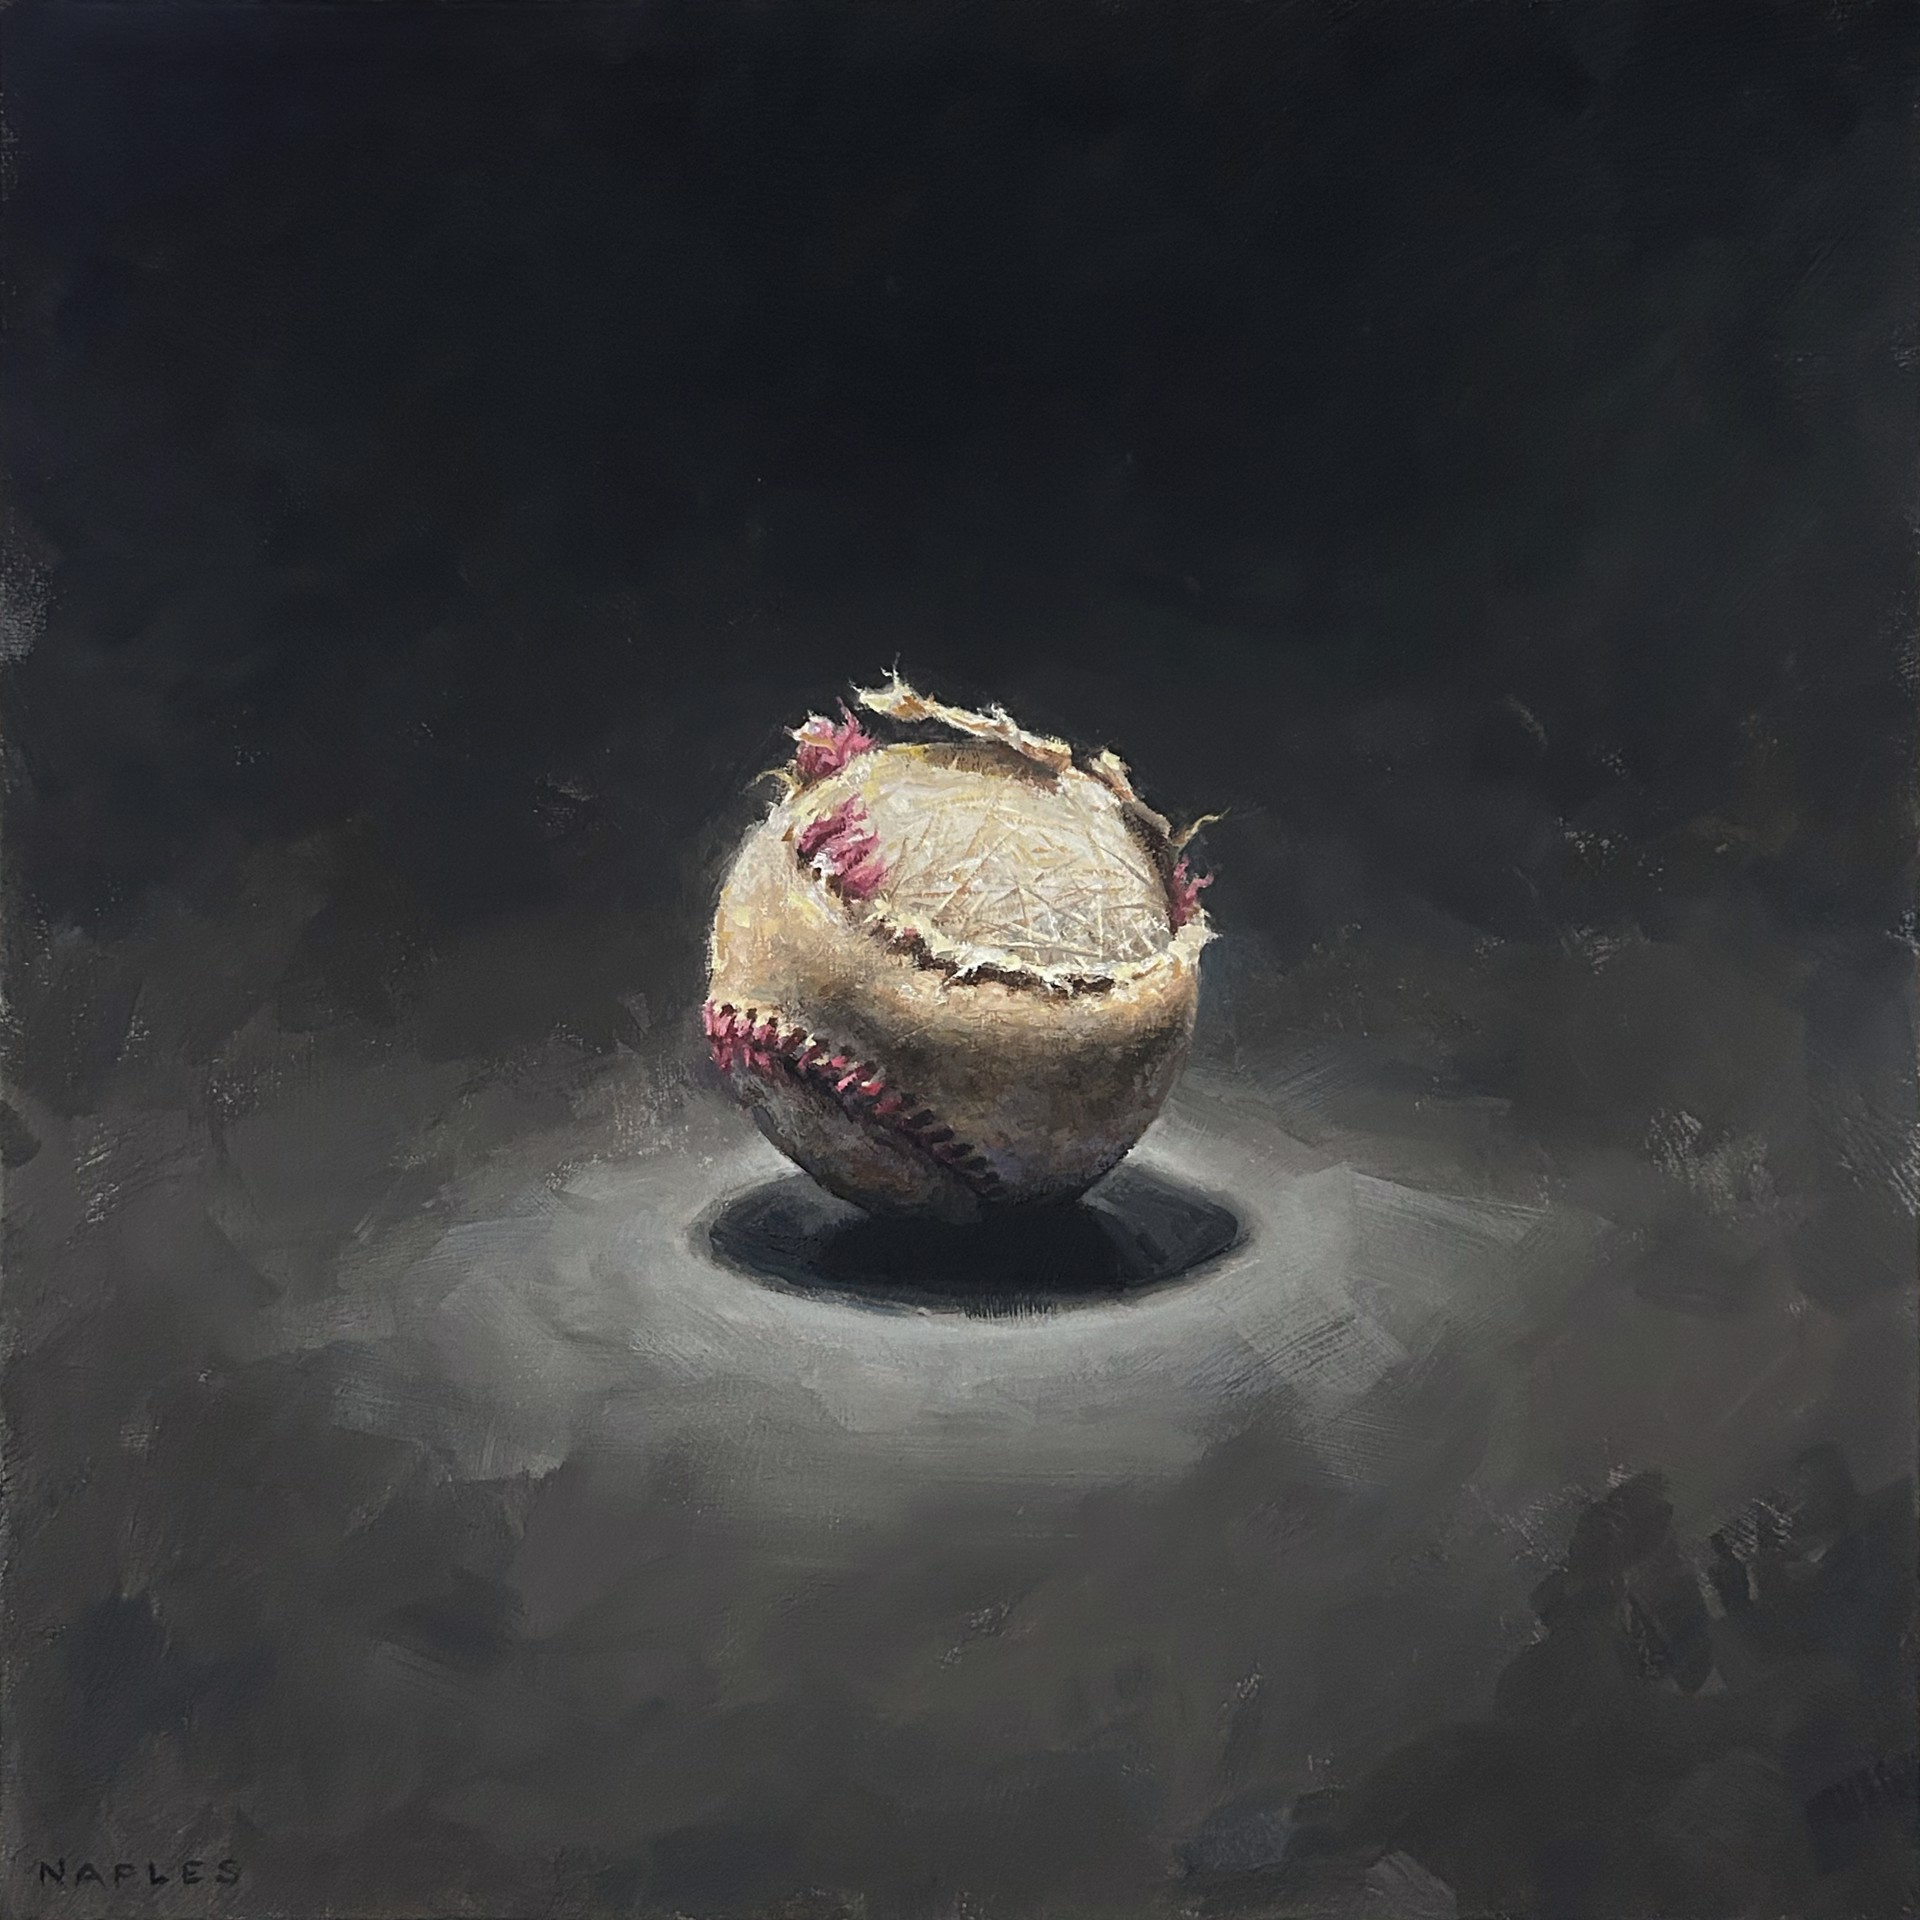 Found Ball, No. 2 by Michael Naples